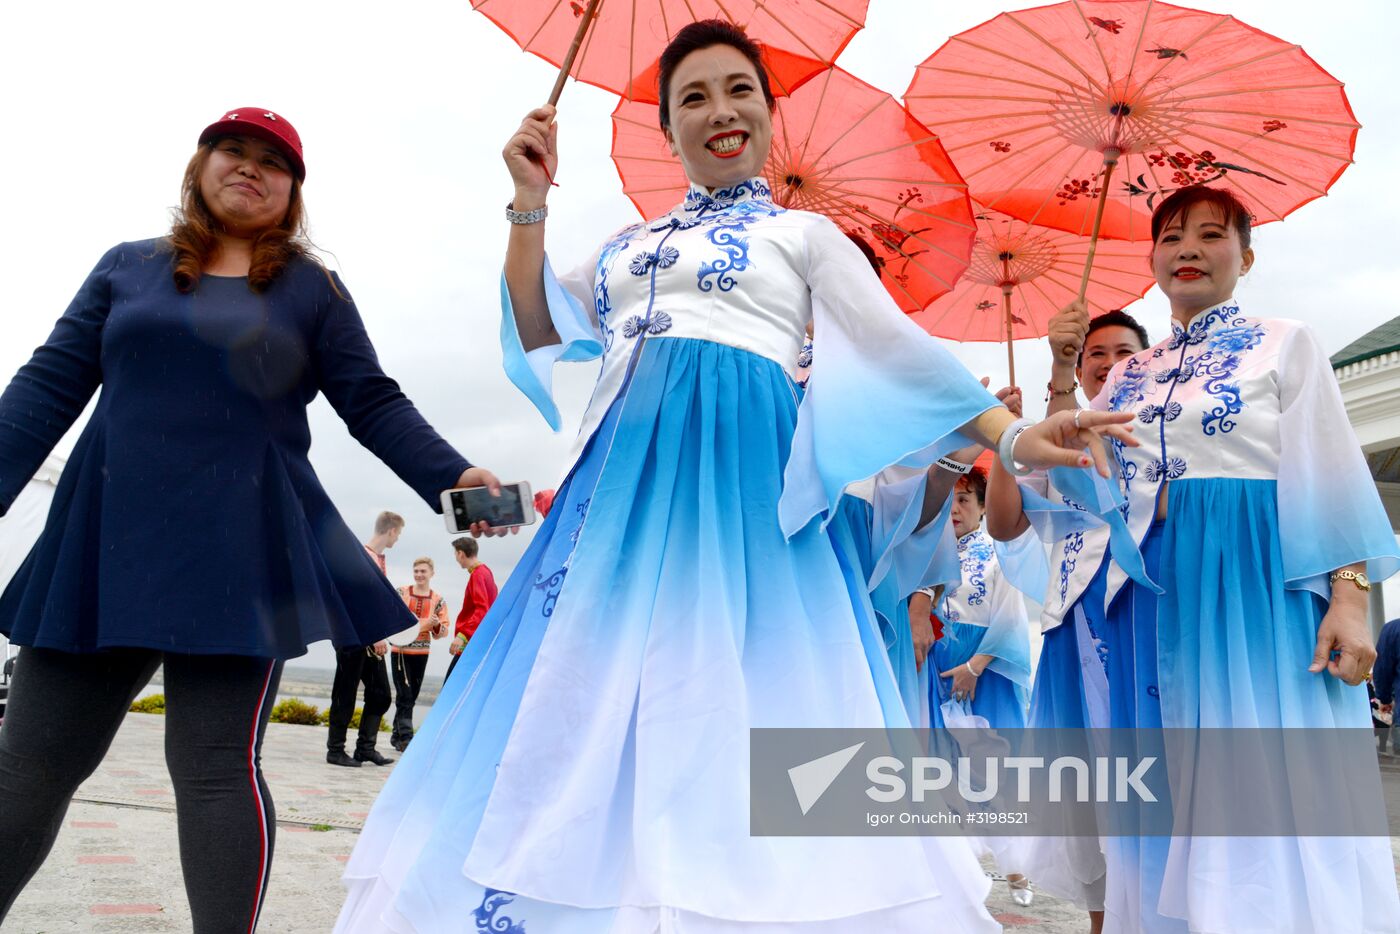 Russian and Chinese people's friendship festival in Khabarovsk Territory